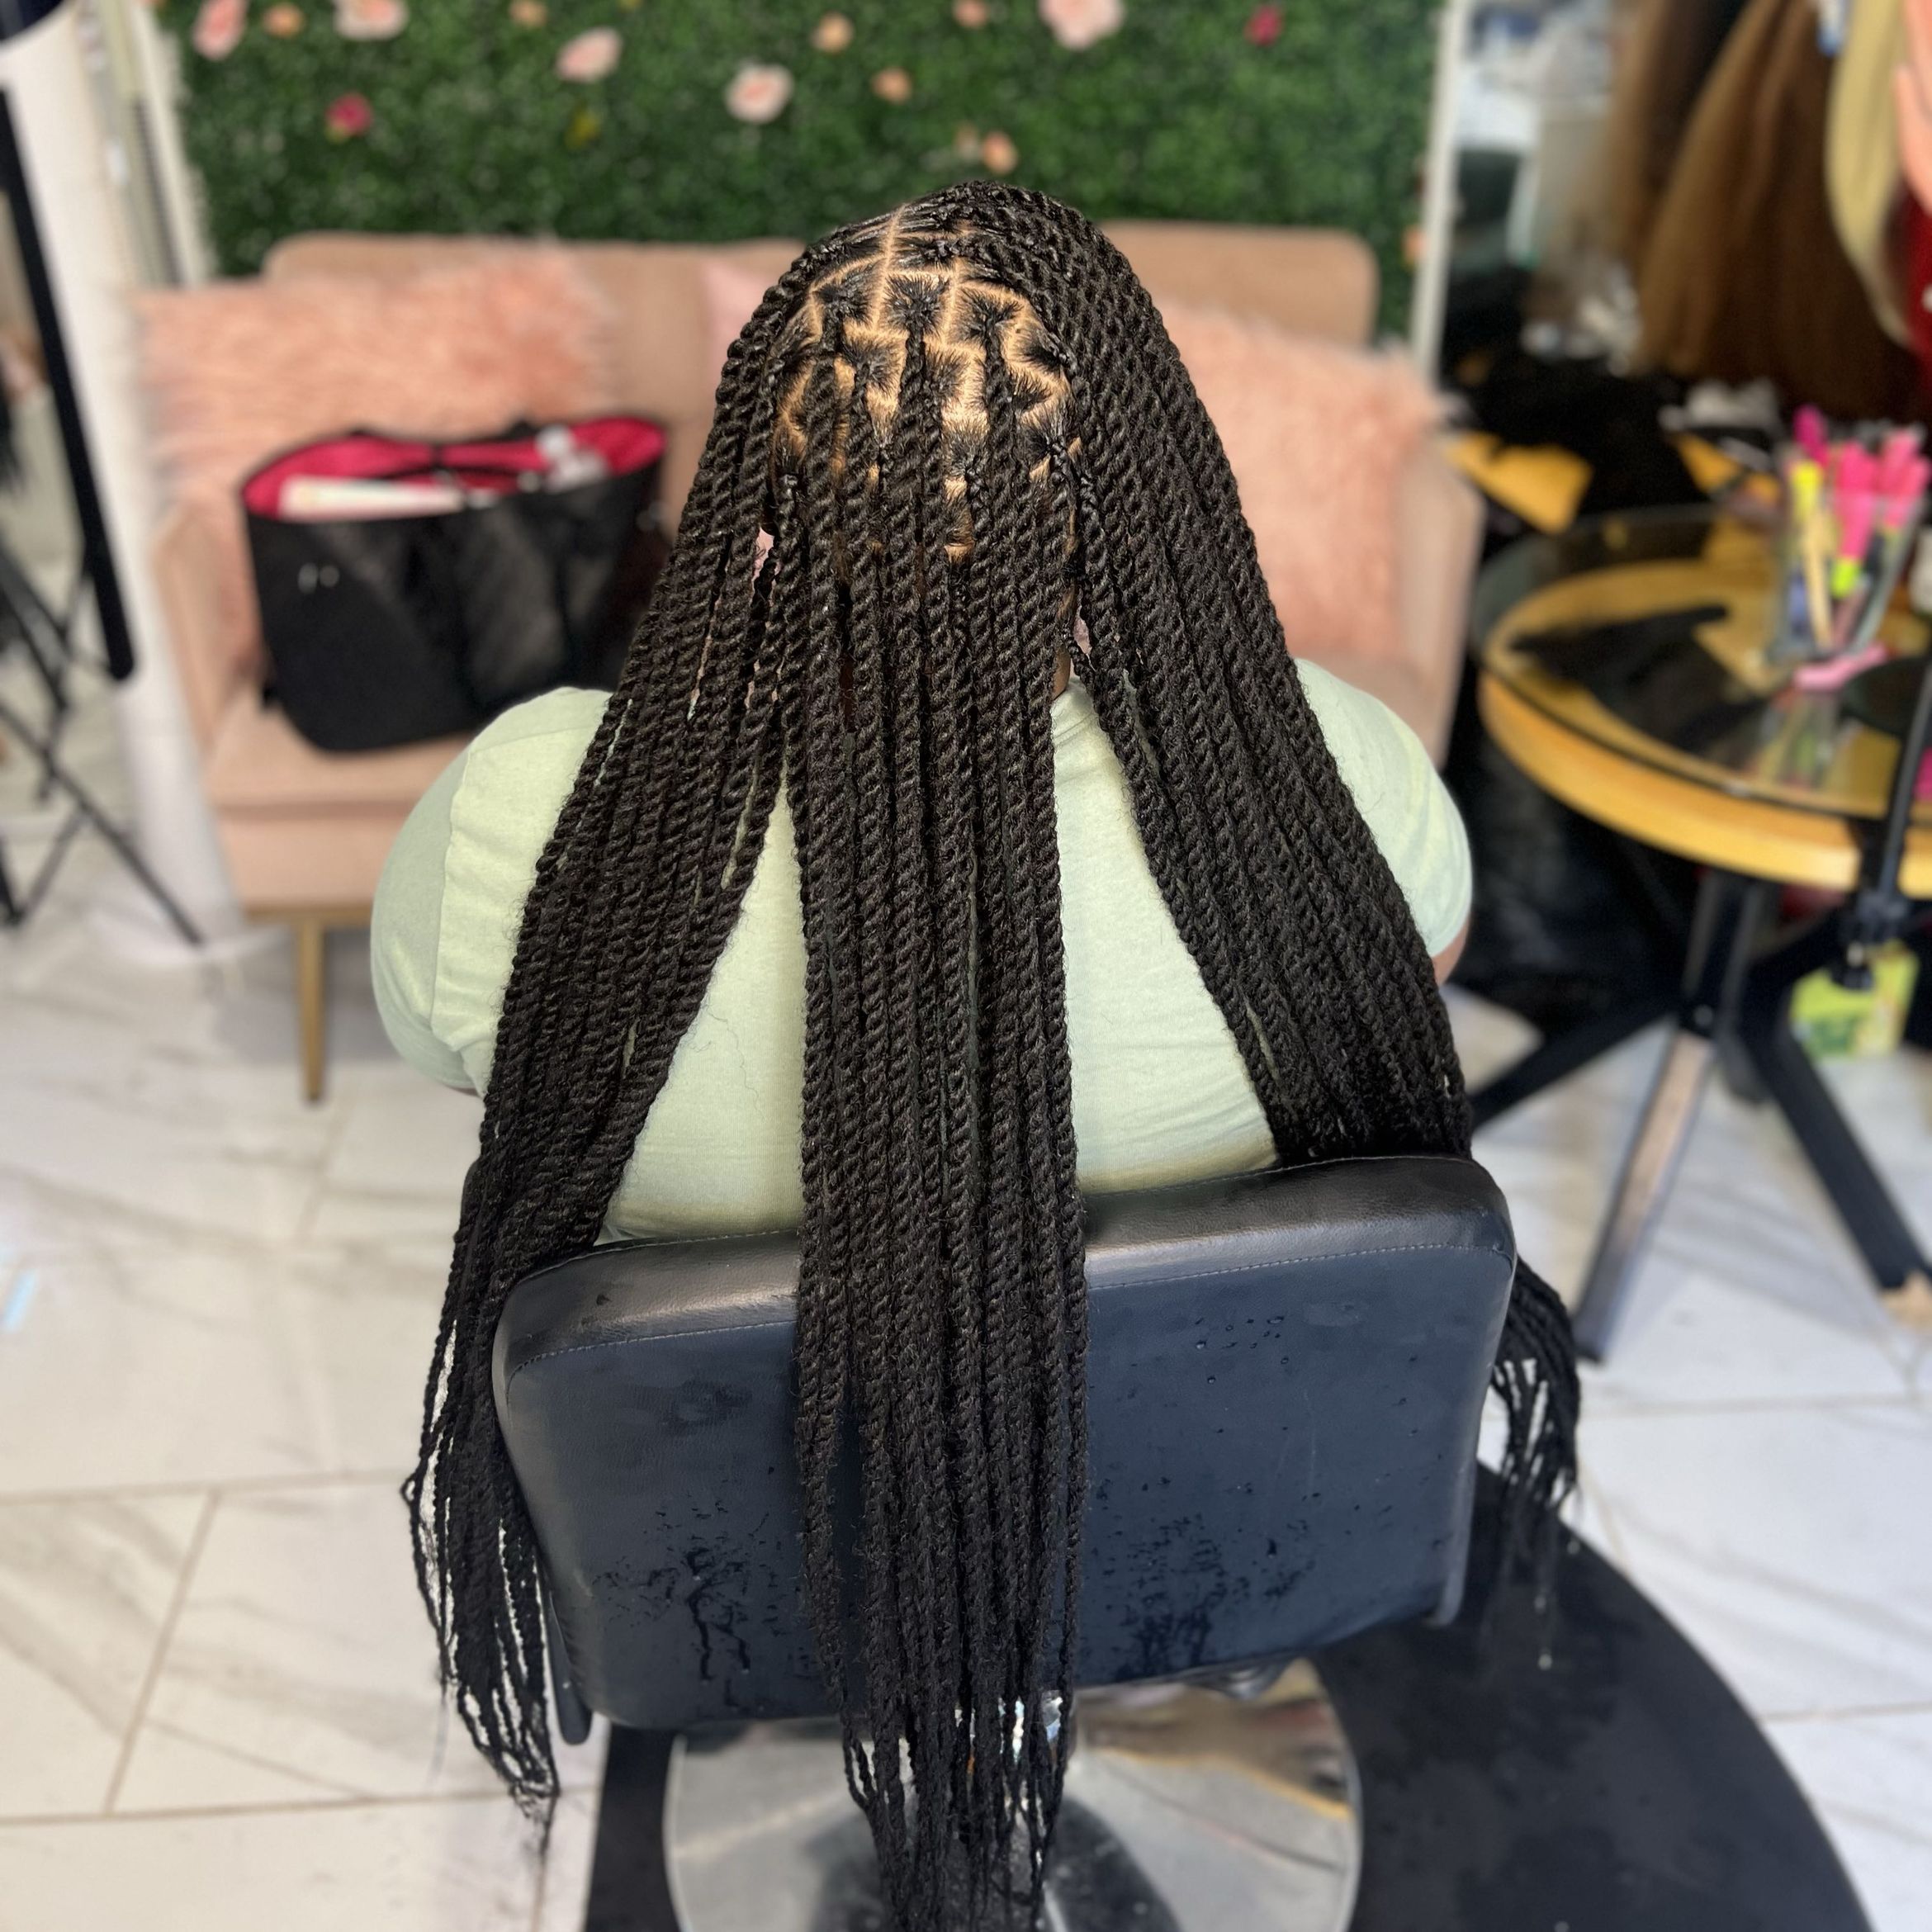 Knotless Senegalese/Marley twist (Hair included) portfolio